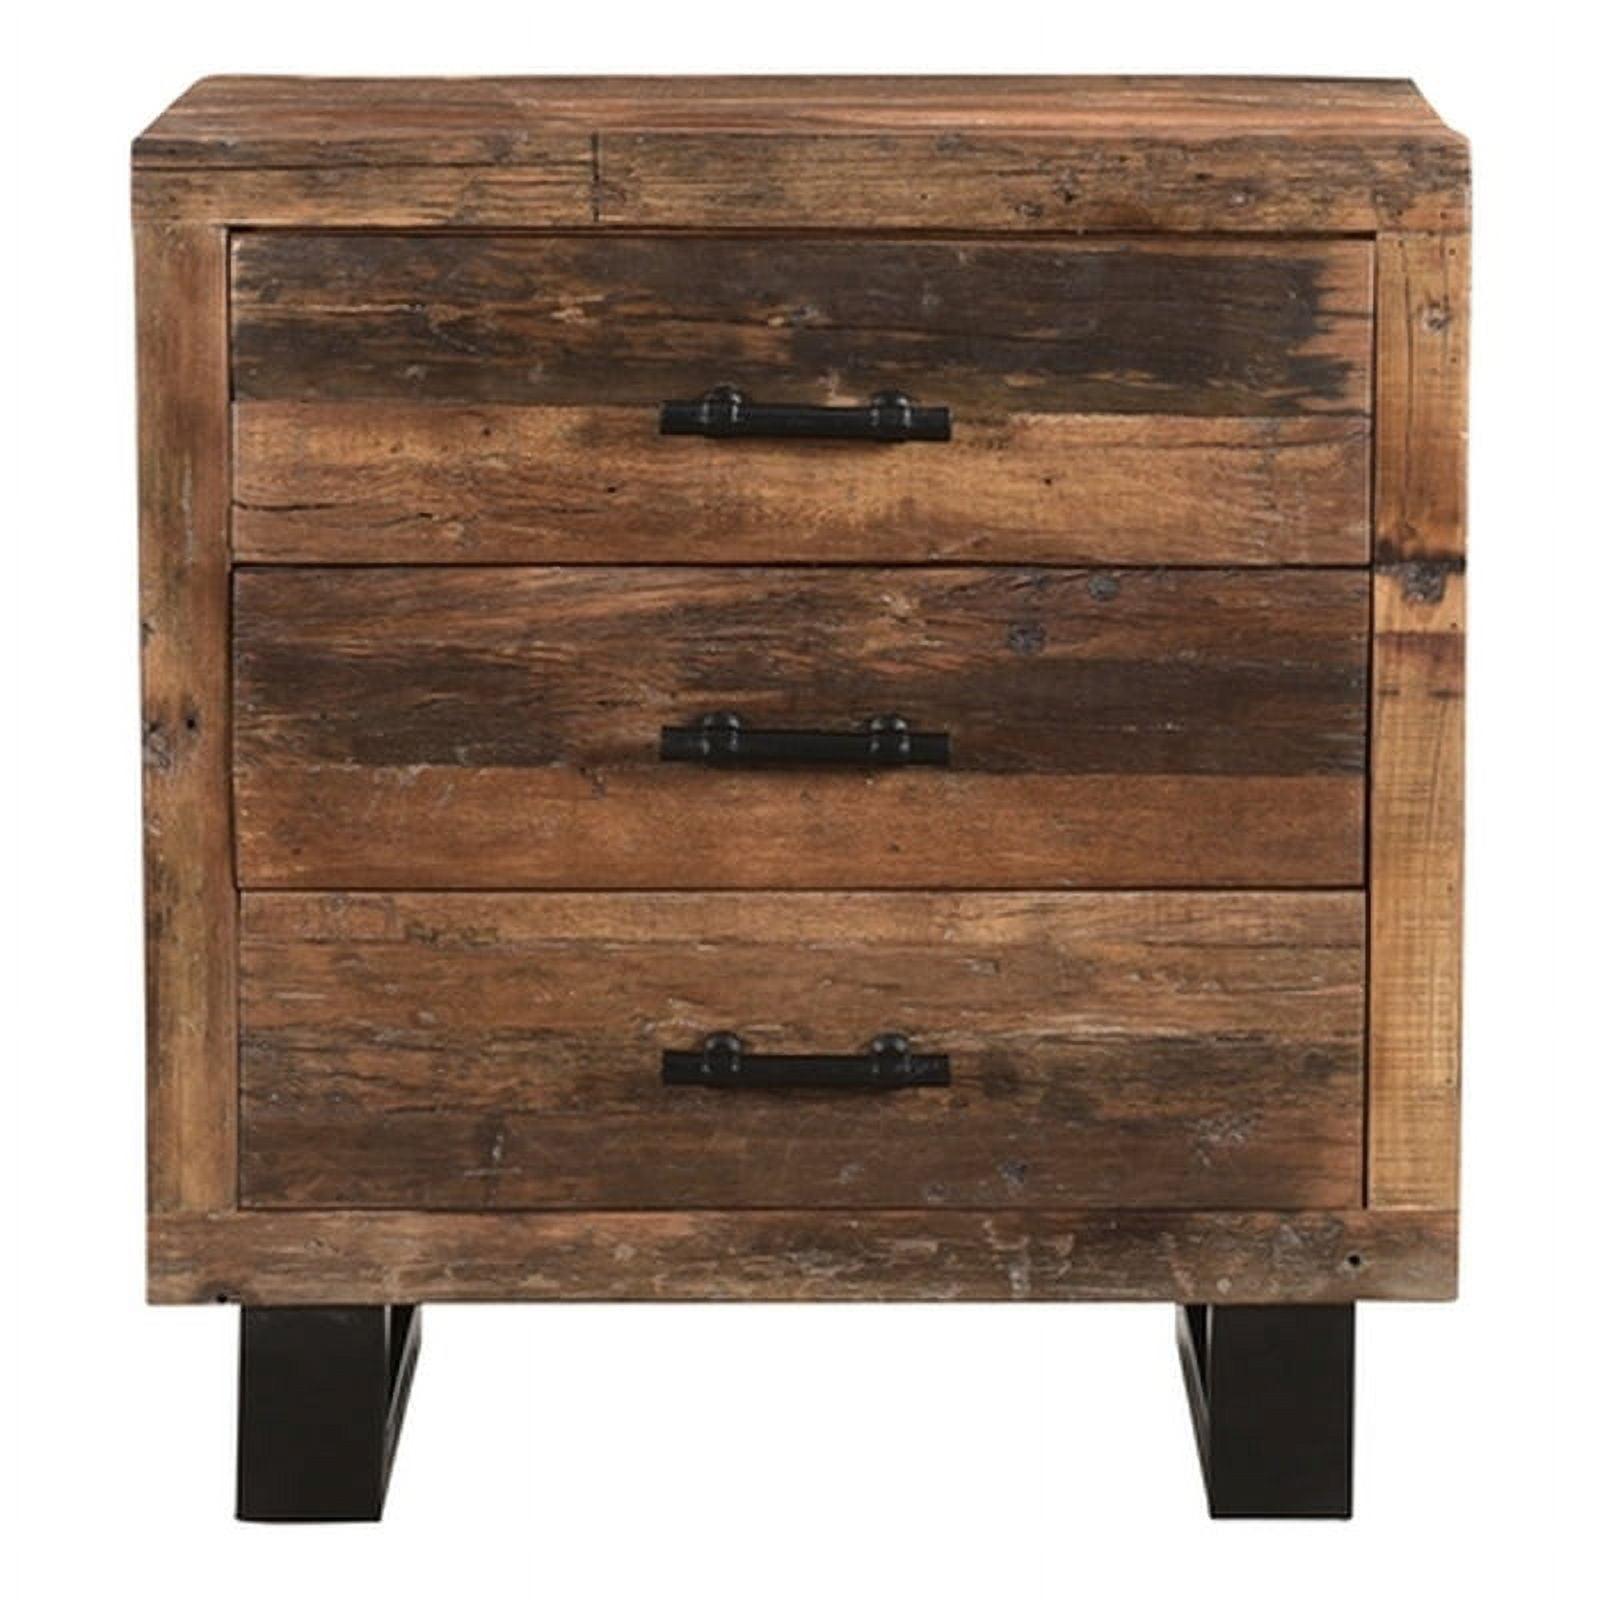 Rustic Brown and Black Distressed Solid Wood Nightstand with 3 Drawers